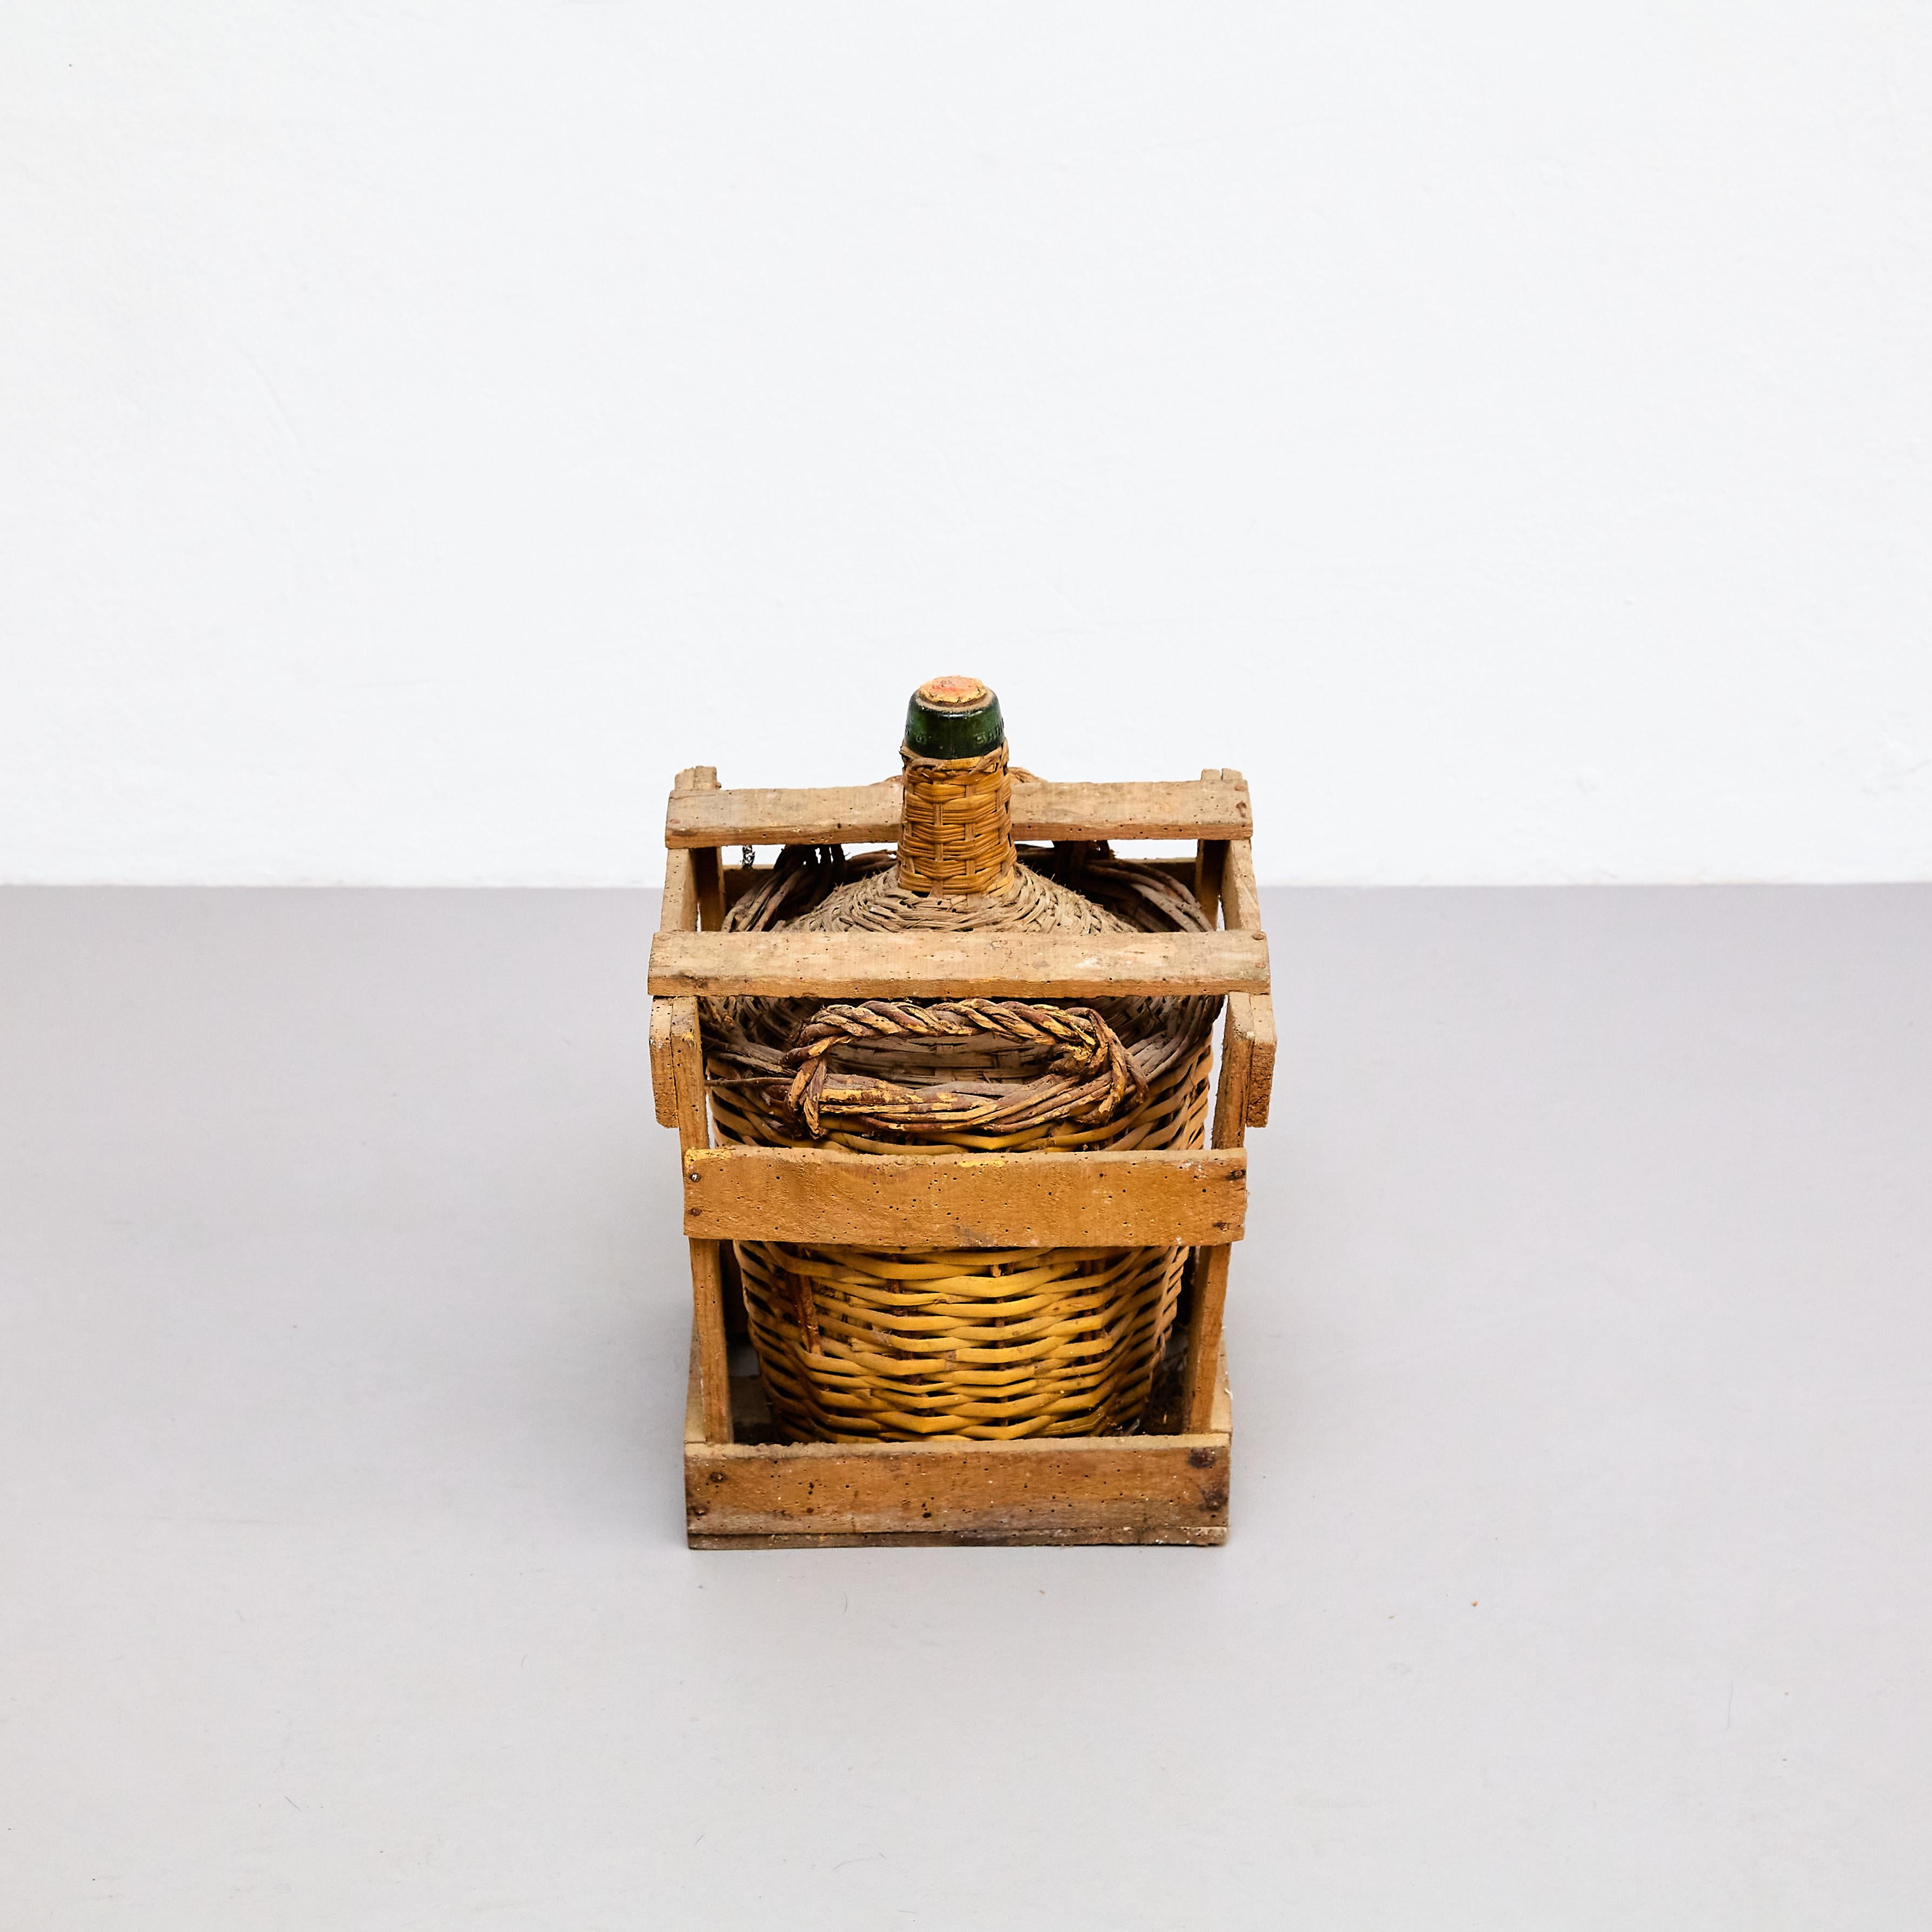 Antique Damajuana glass bottle with rattan and wood basket, by unknown artist.

Manufactured in Barcelona, circa 1950.

Materials:
Glass, rattan, wood.

Dimensions:
D 30 W 31.8 H 41.5

In original condition, with some visible signs of